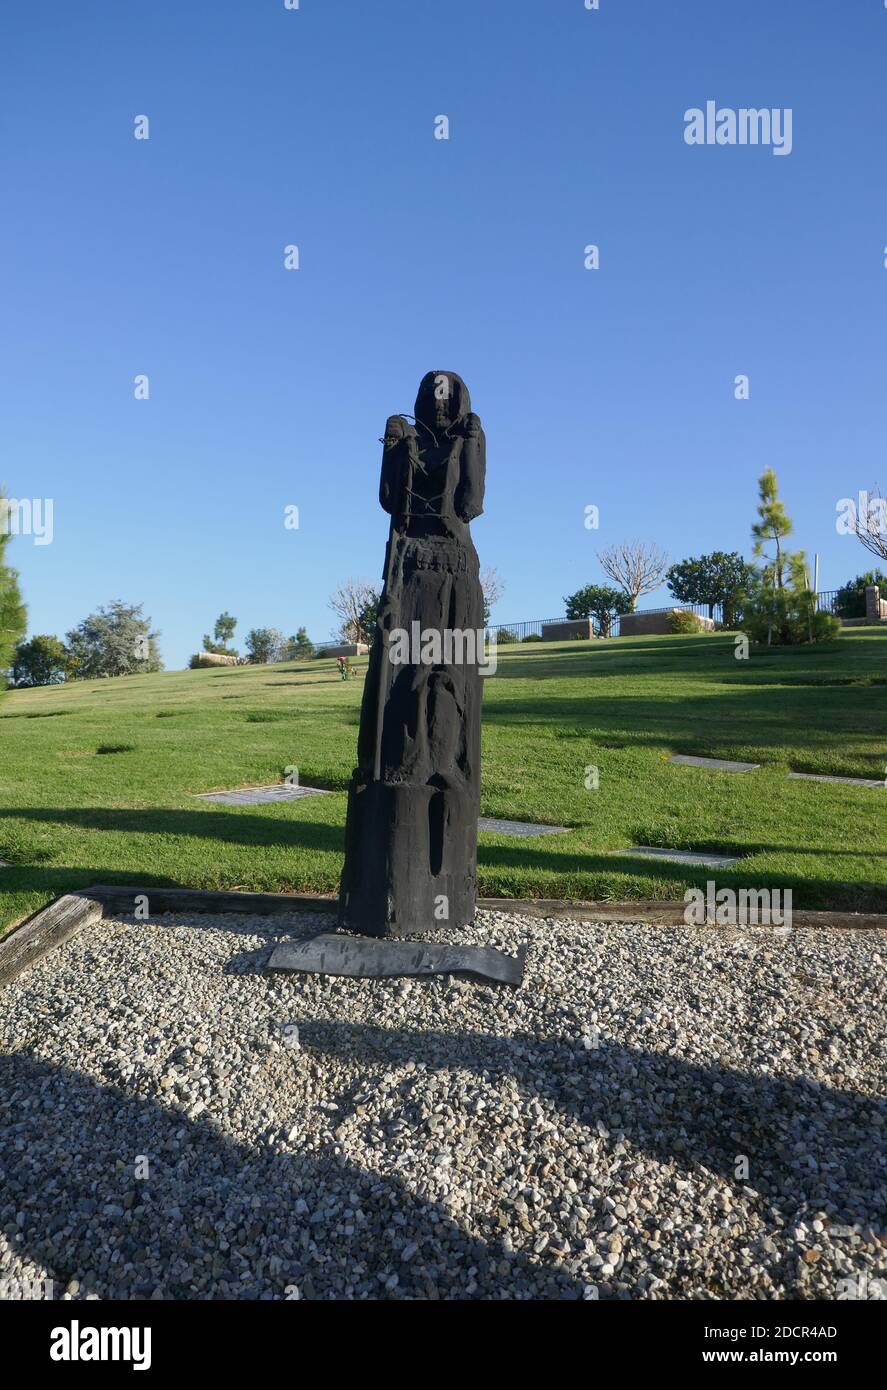 Los Angeles, California, USA 17th November 2020 A general view of atmosphere of Memorial To The Six Million at Mount Sinai Cemetery Hollywood Hills on November 17, 2020 in Los Angeles, California, USA. Photo by Barry King/Alamy Stock Photo Stock Photo